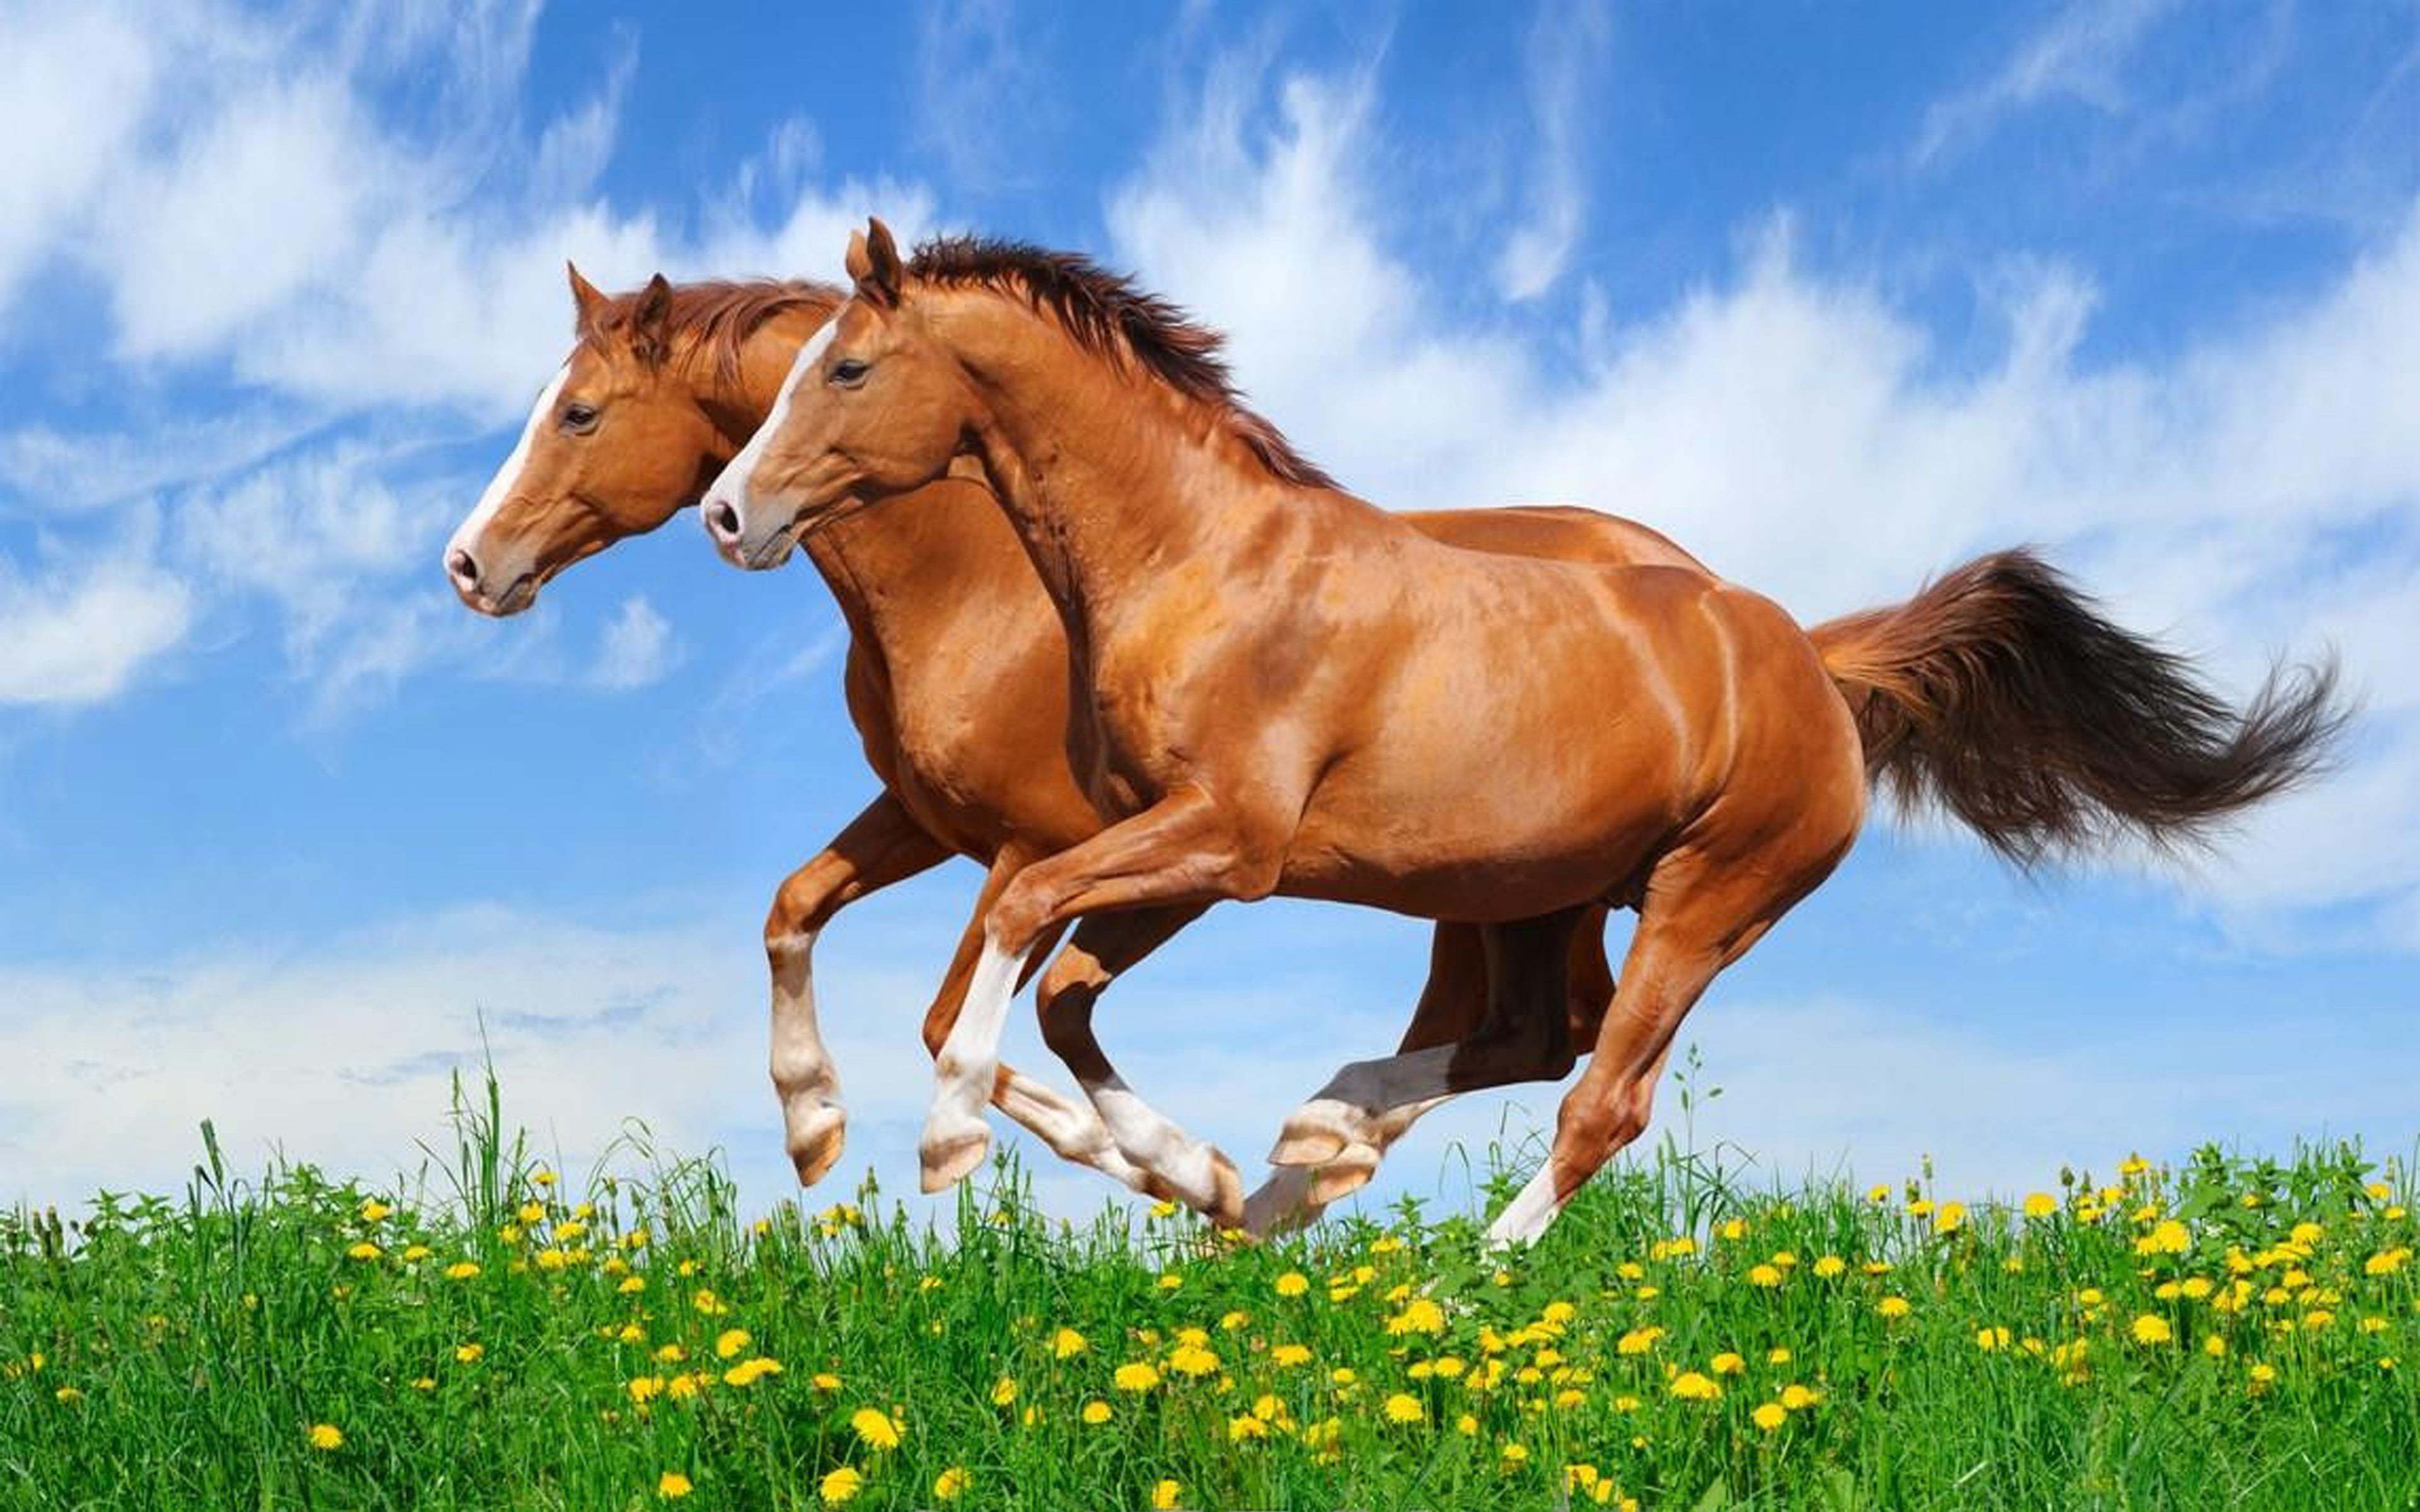 Two Red Horses Galloping In A Field With Green Grass, Beautiful Hd Wallpaper For Desktop